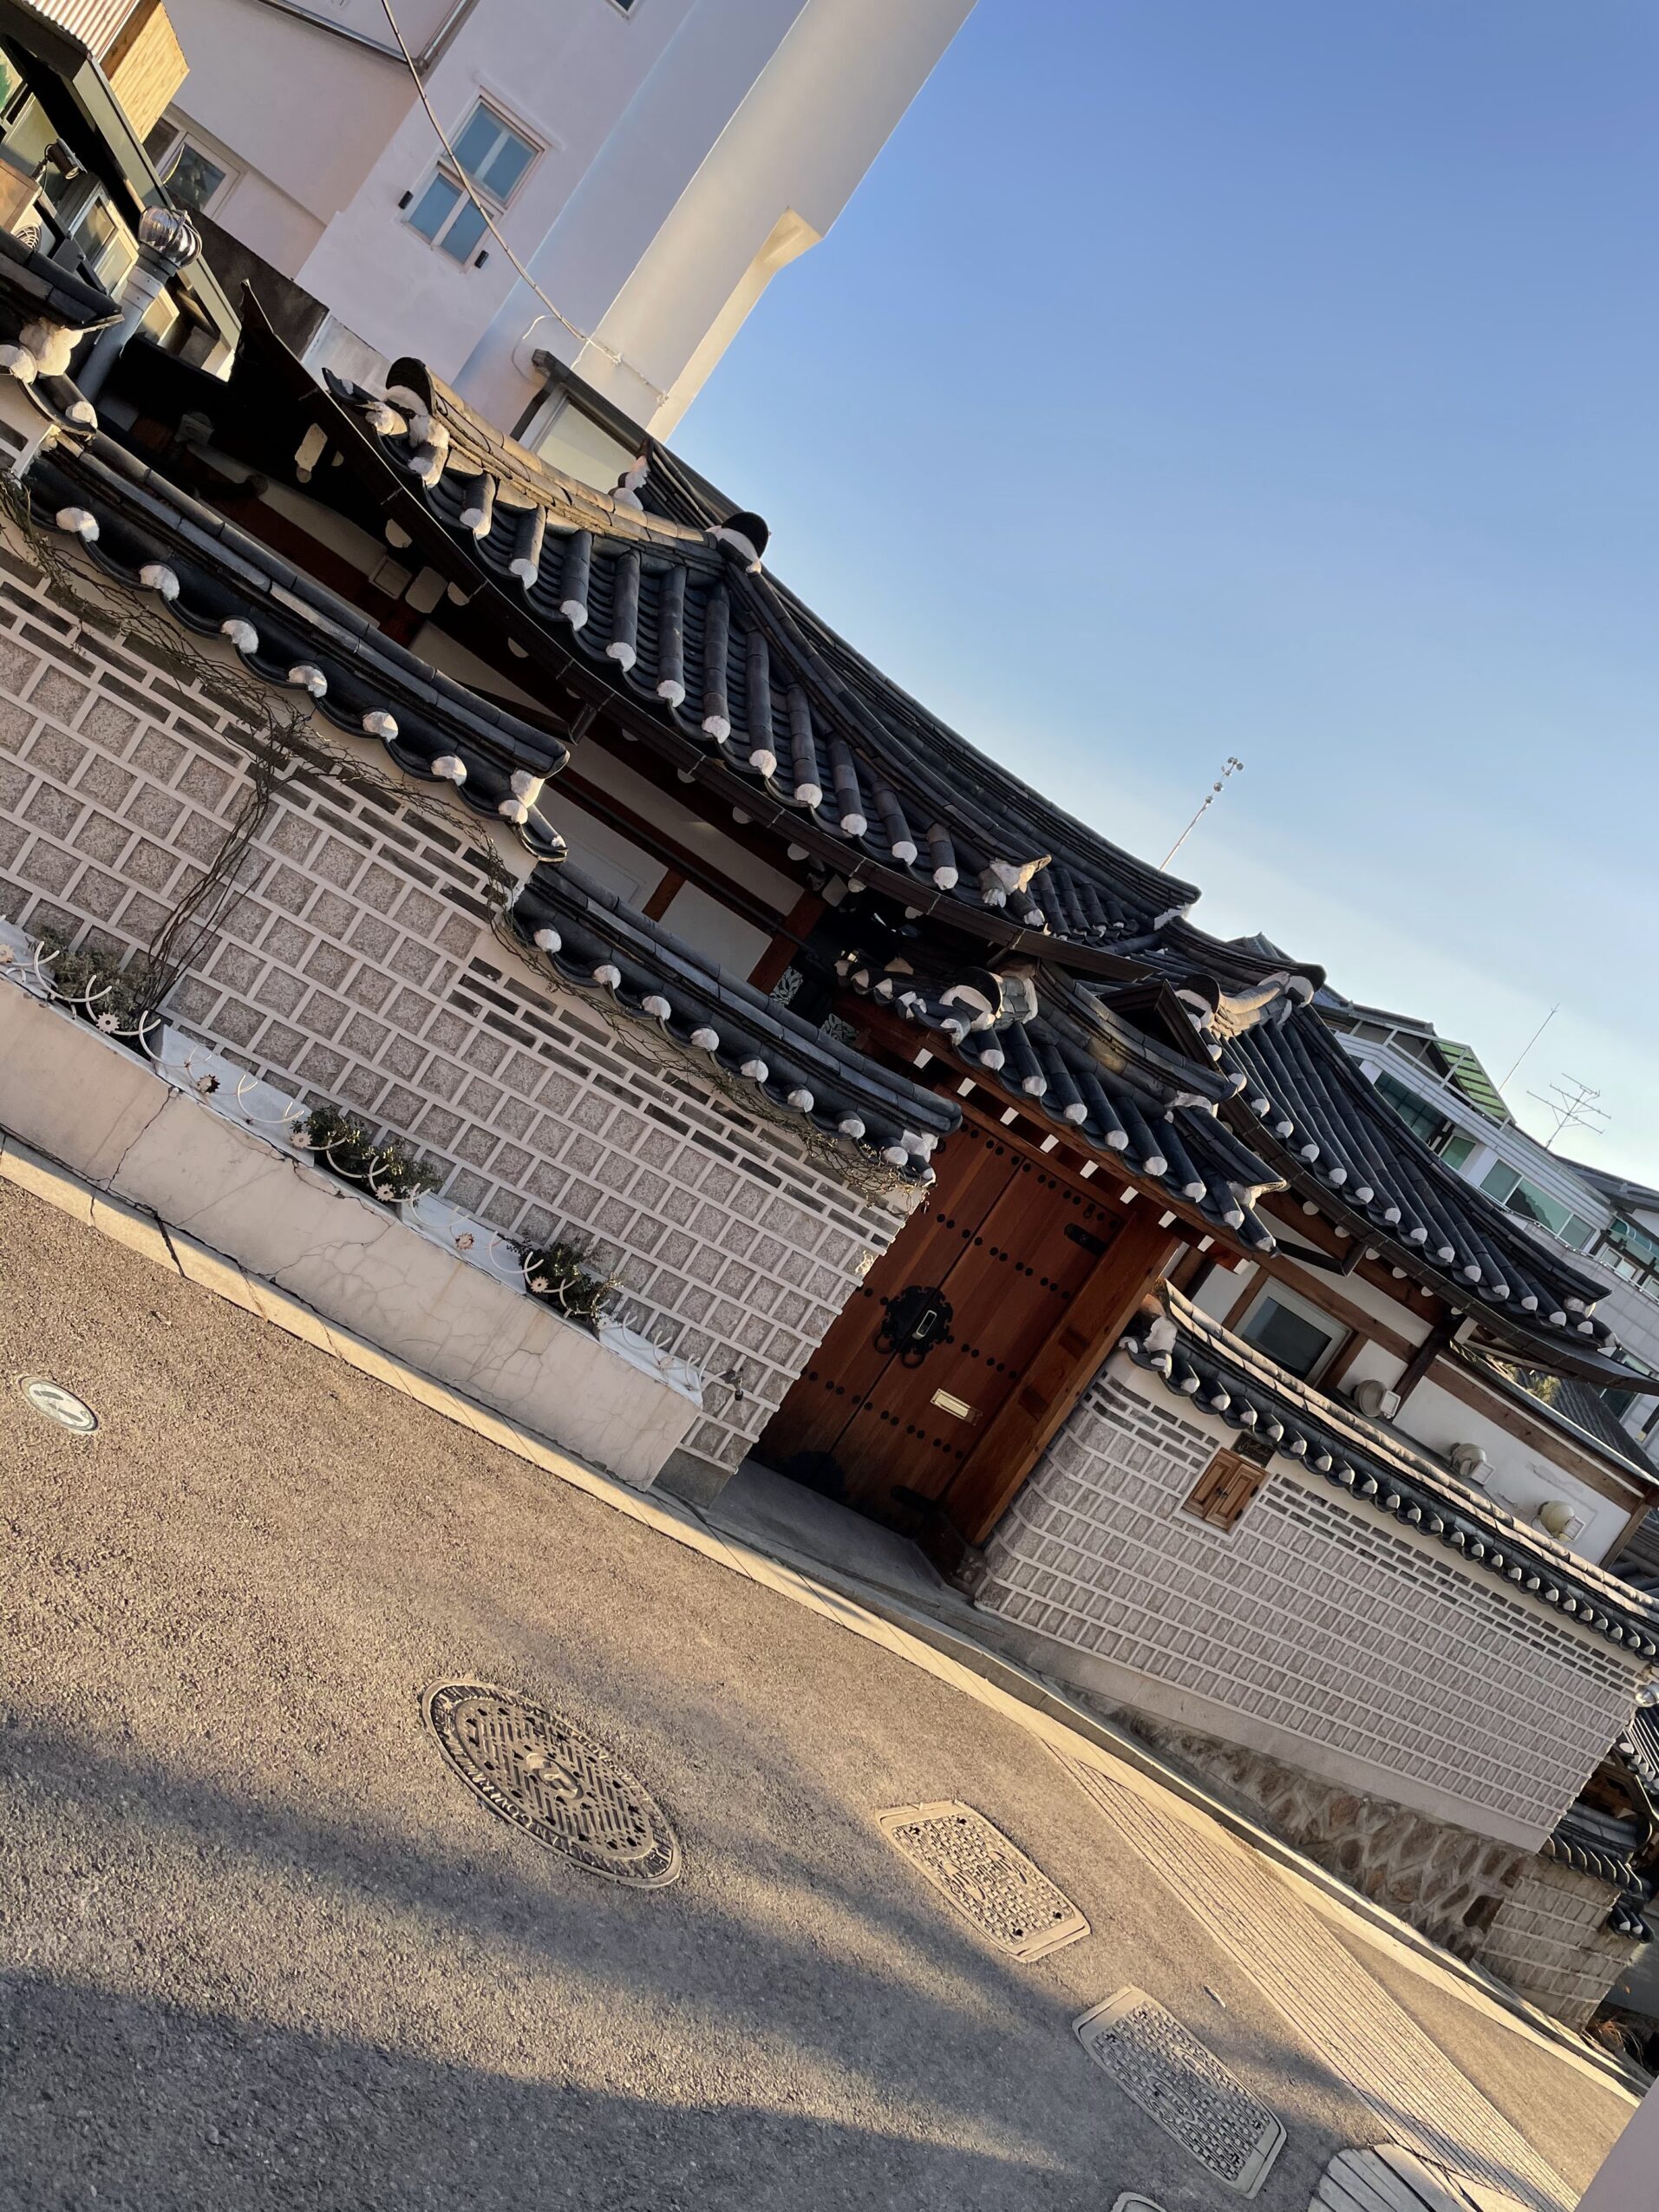 Bukchon Hanok Village: All You Need to Know